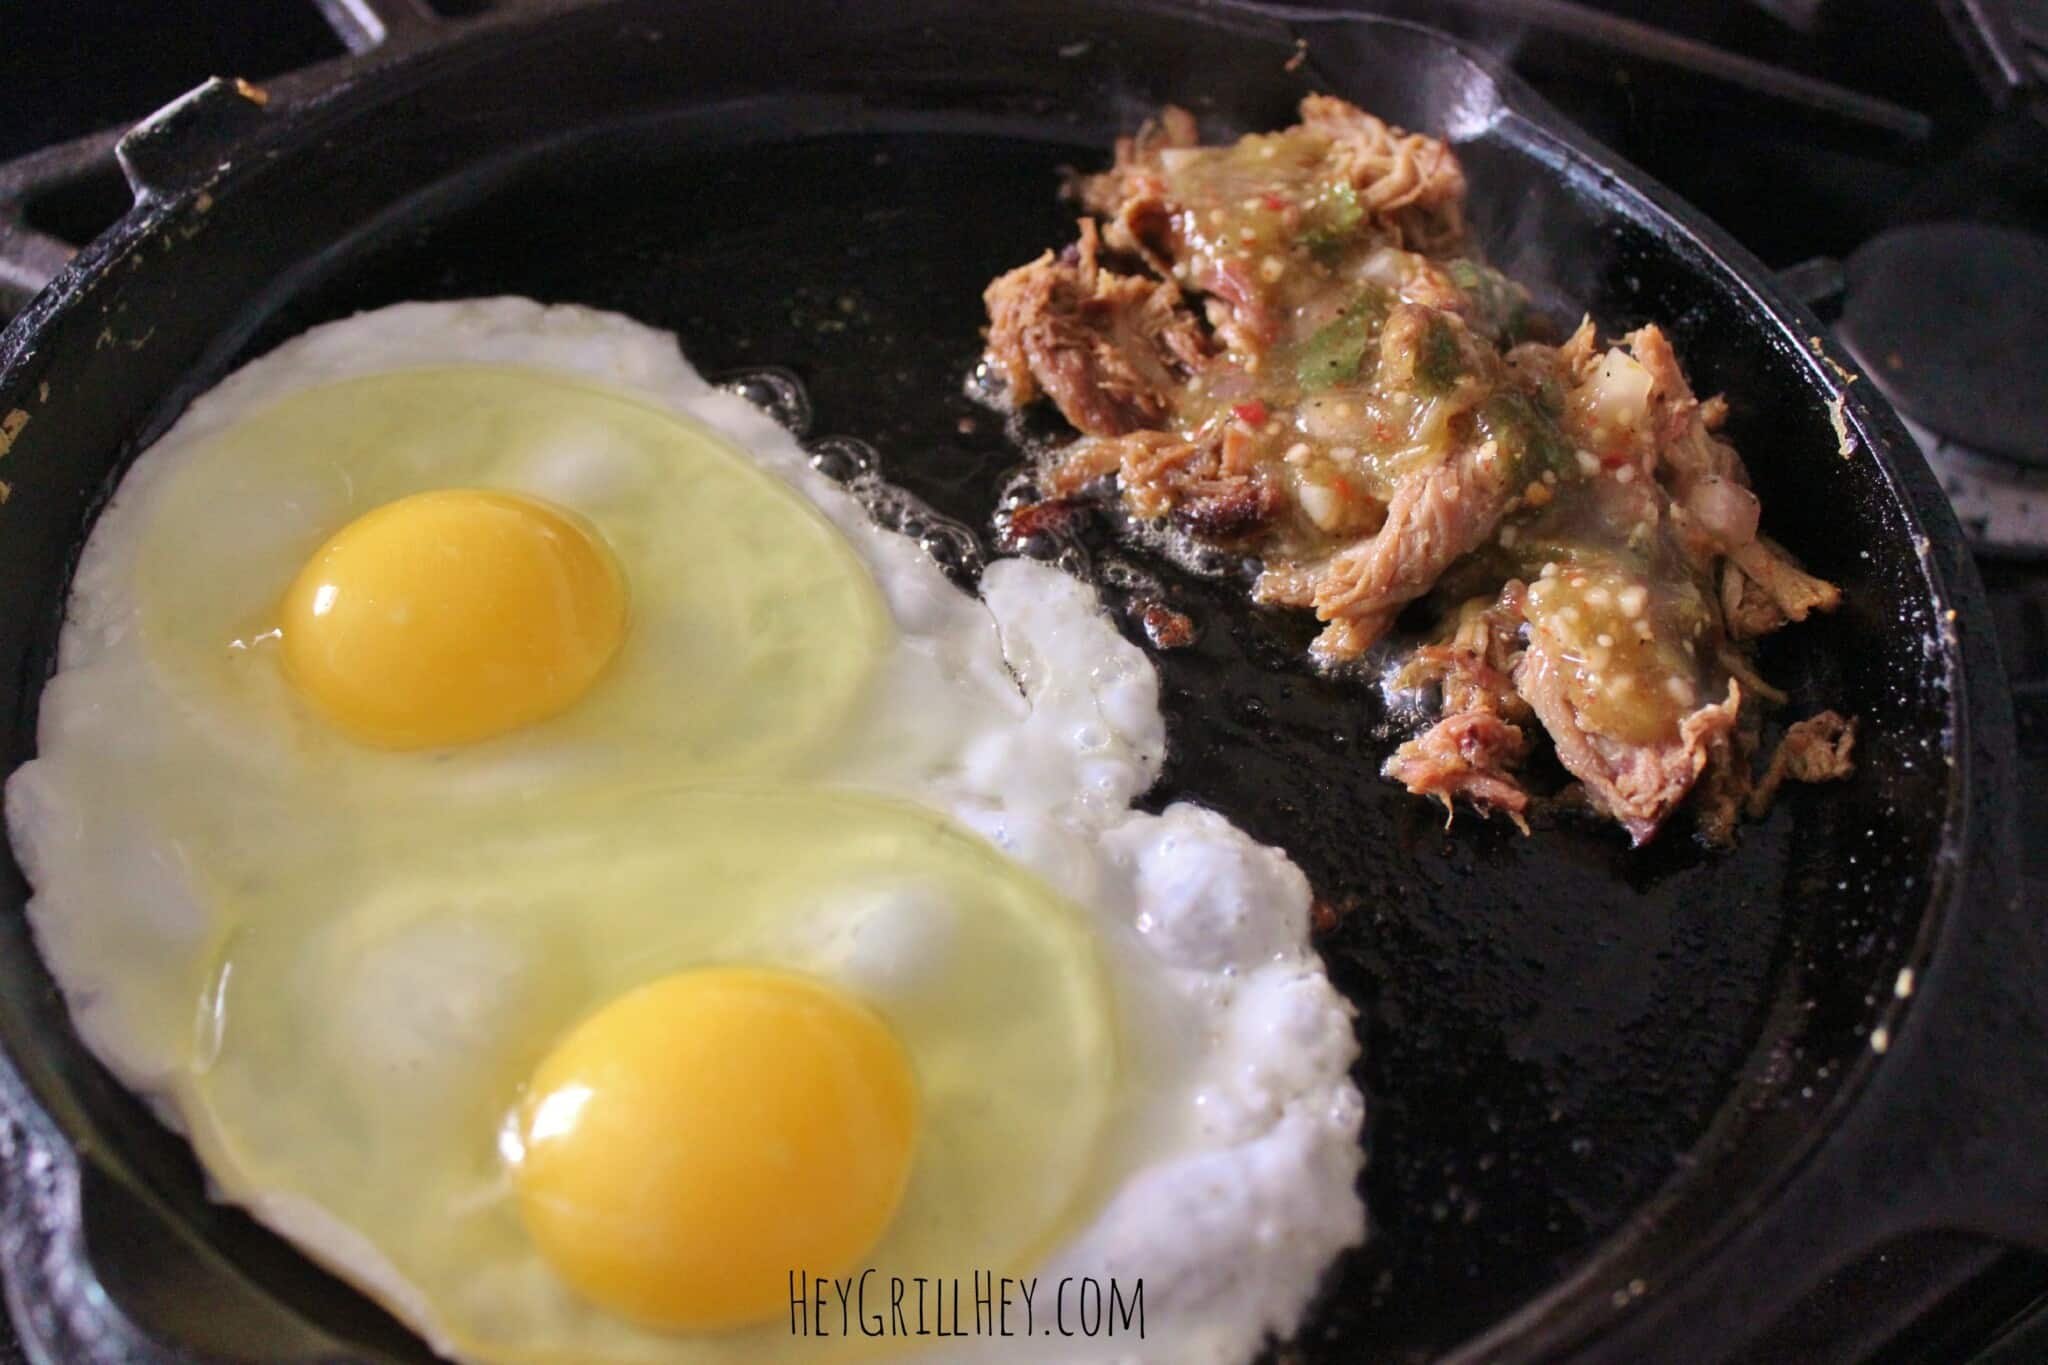 Hot skillet topped with two eggs cooking and a pile of pulled pork topped with green salsa.